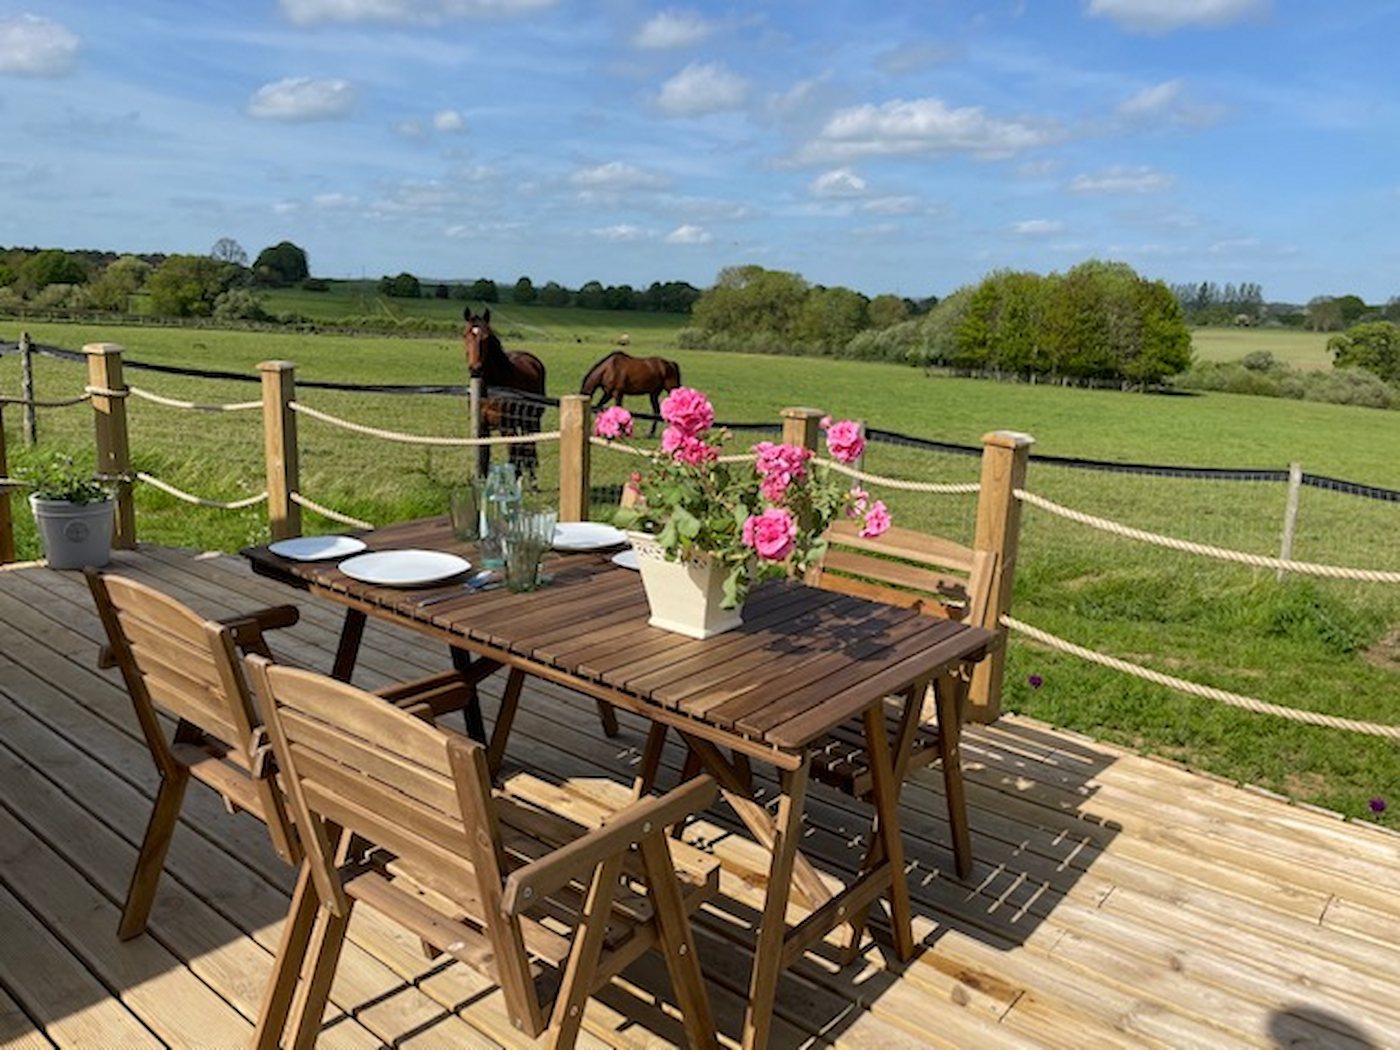 Luxury Cabin Decking area with outdoor table and chairs, close to horse grazing